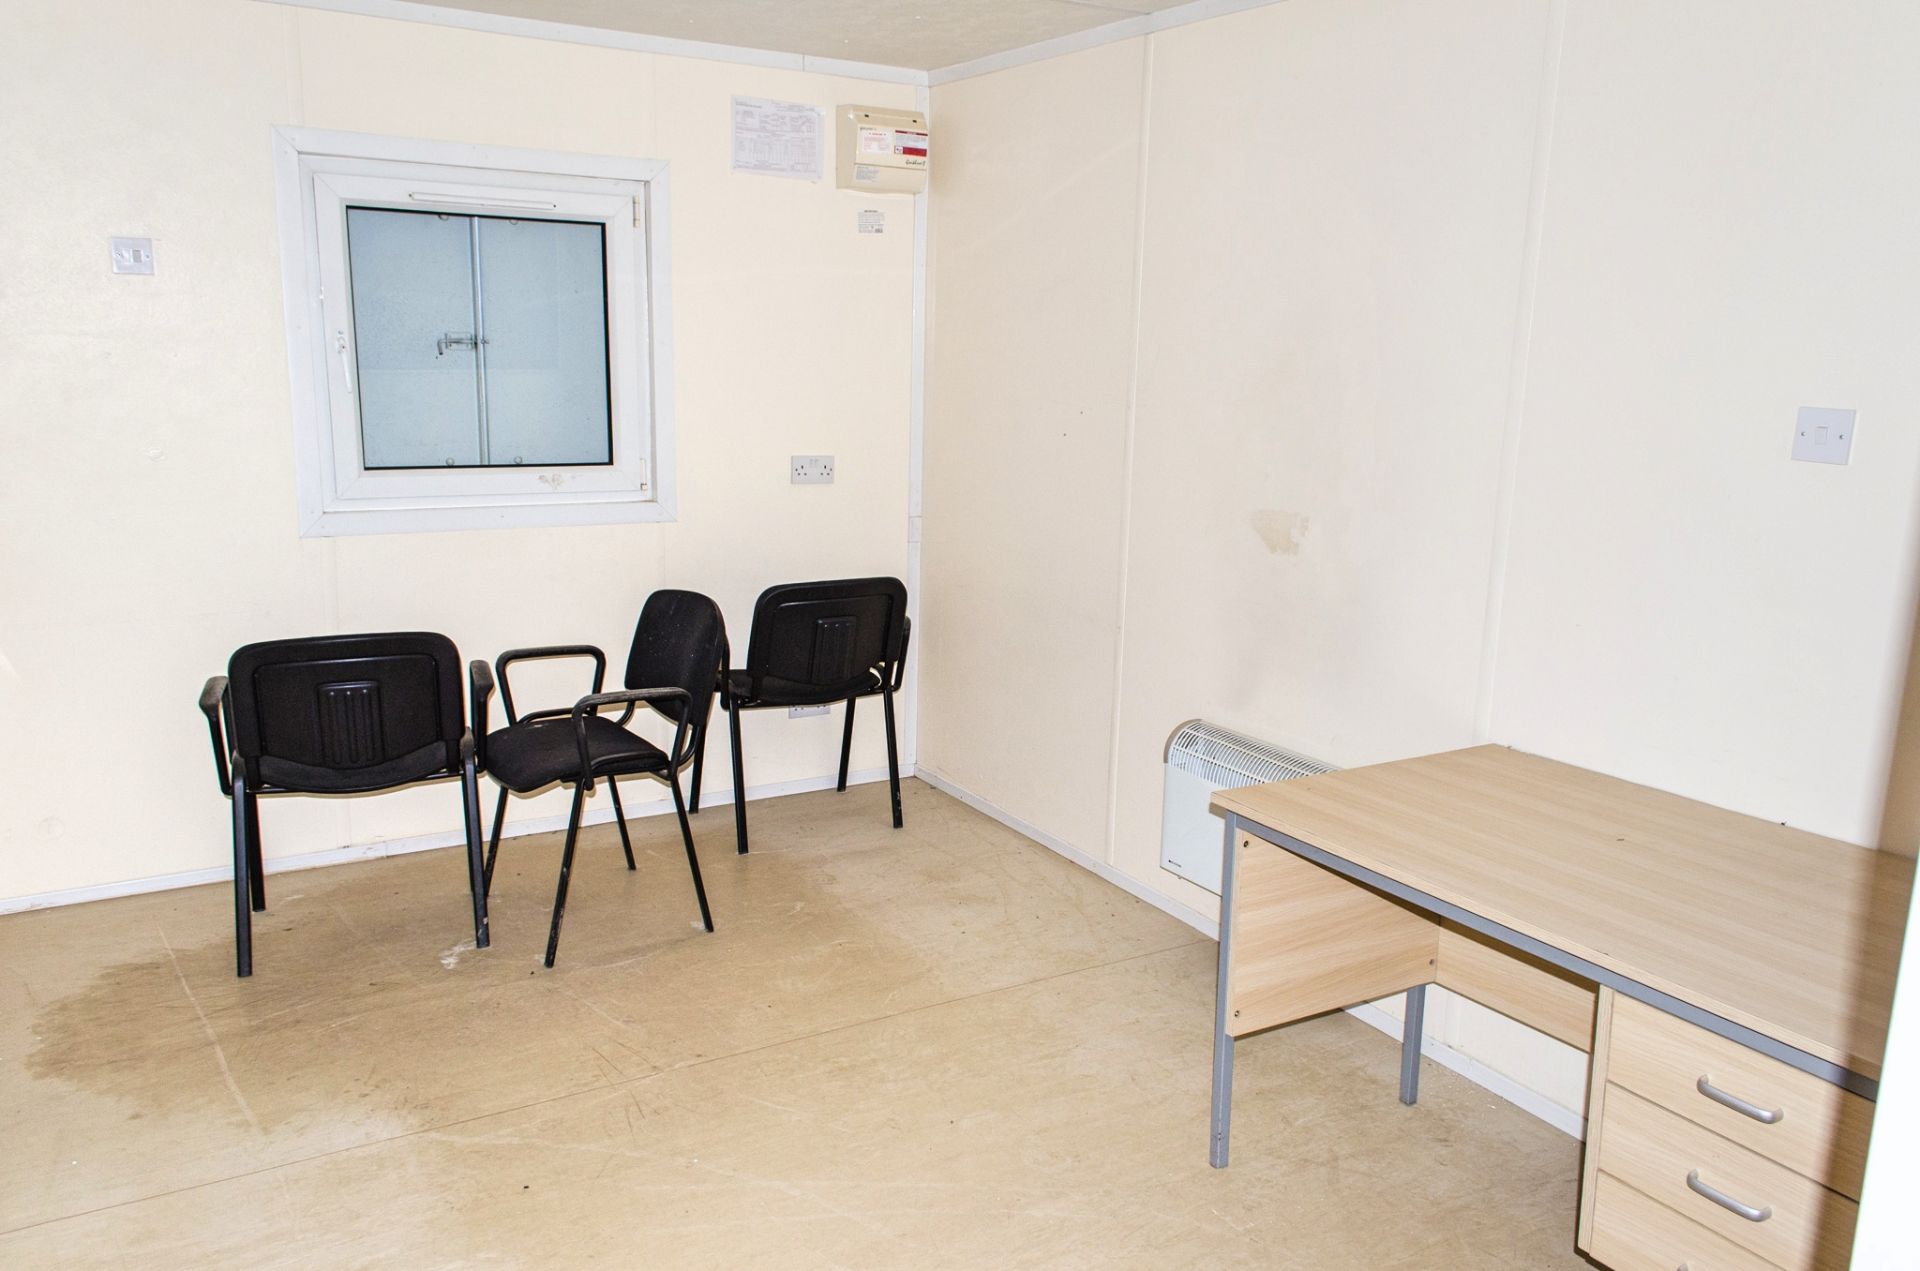 32ft x 10ft steel anti-vandal office site unit Comprising of: kitchen/office area & seperate - Image 7 of 7